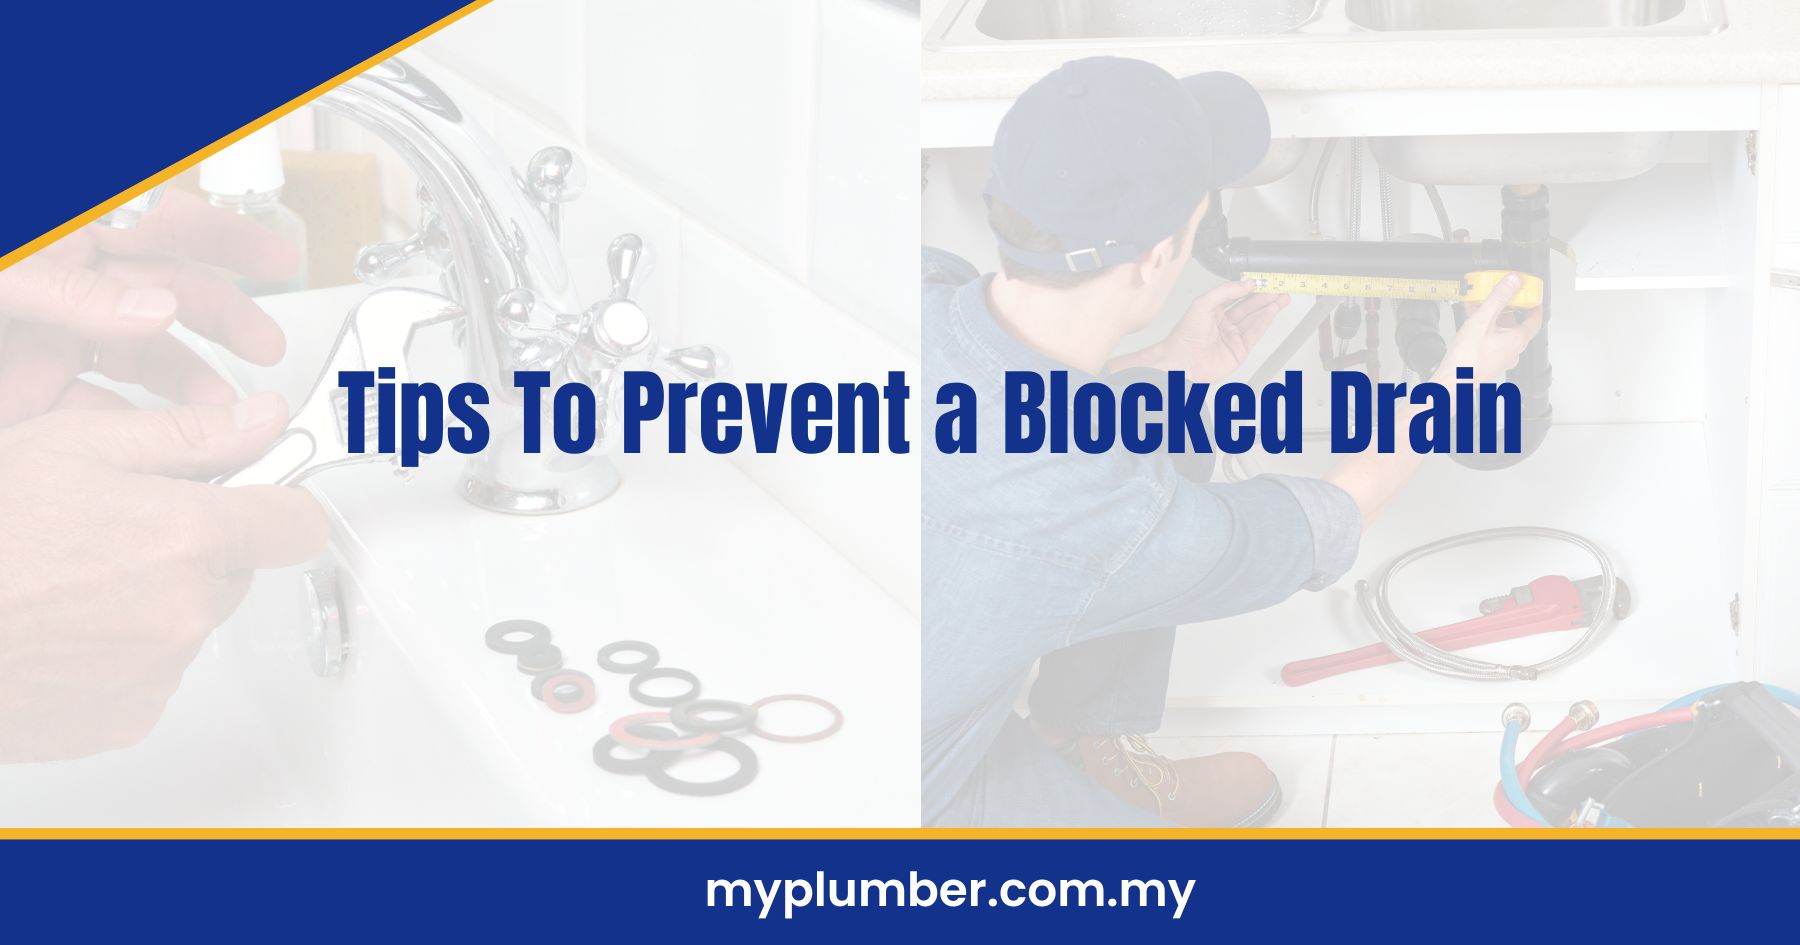 Tips To Prevent a Blocked Drain